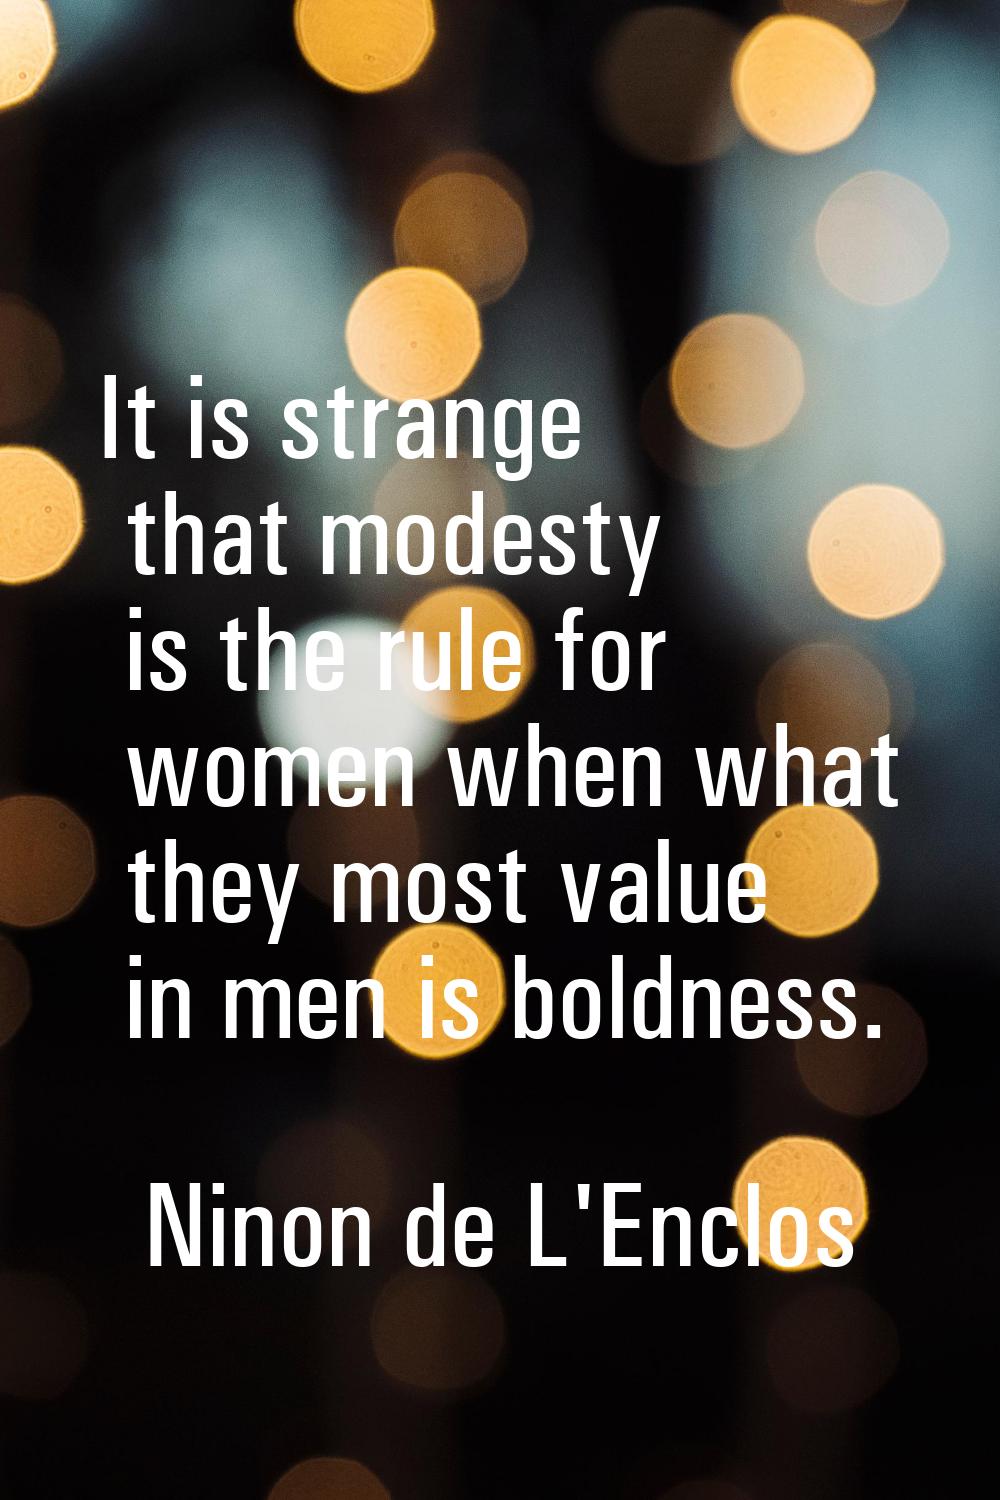 It is strange that modesty is the rule for women when what they most value in men is boldness.